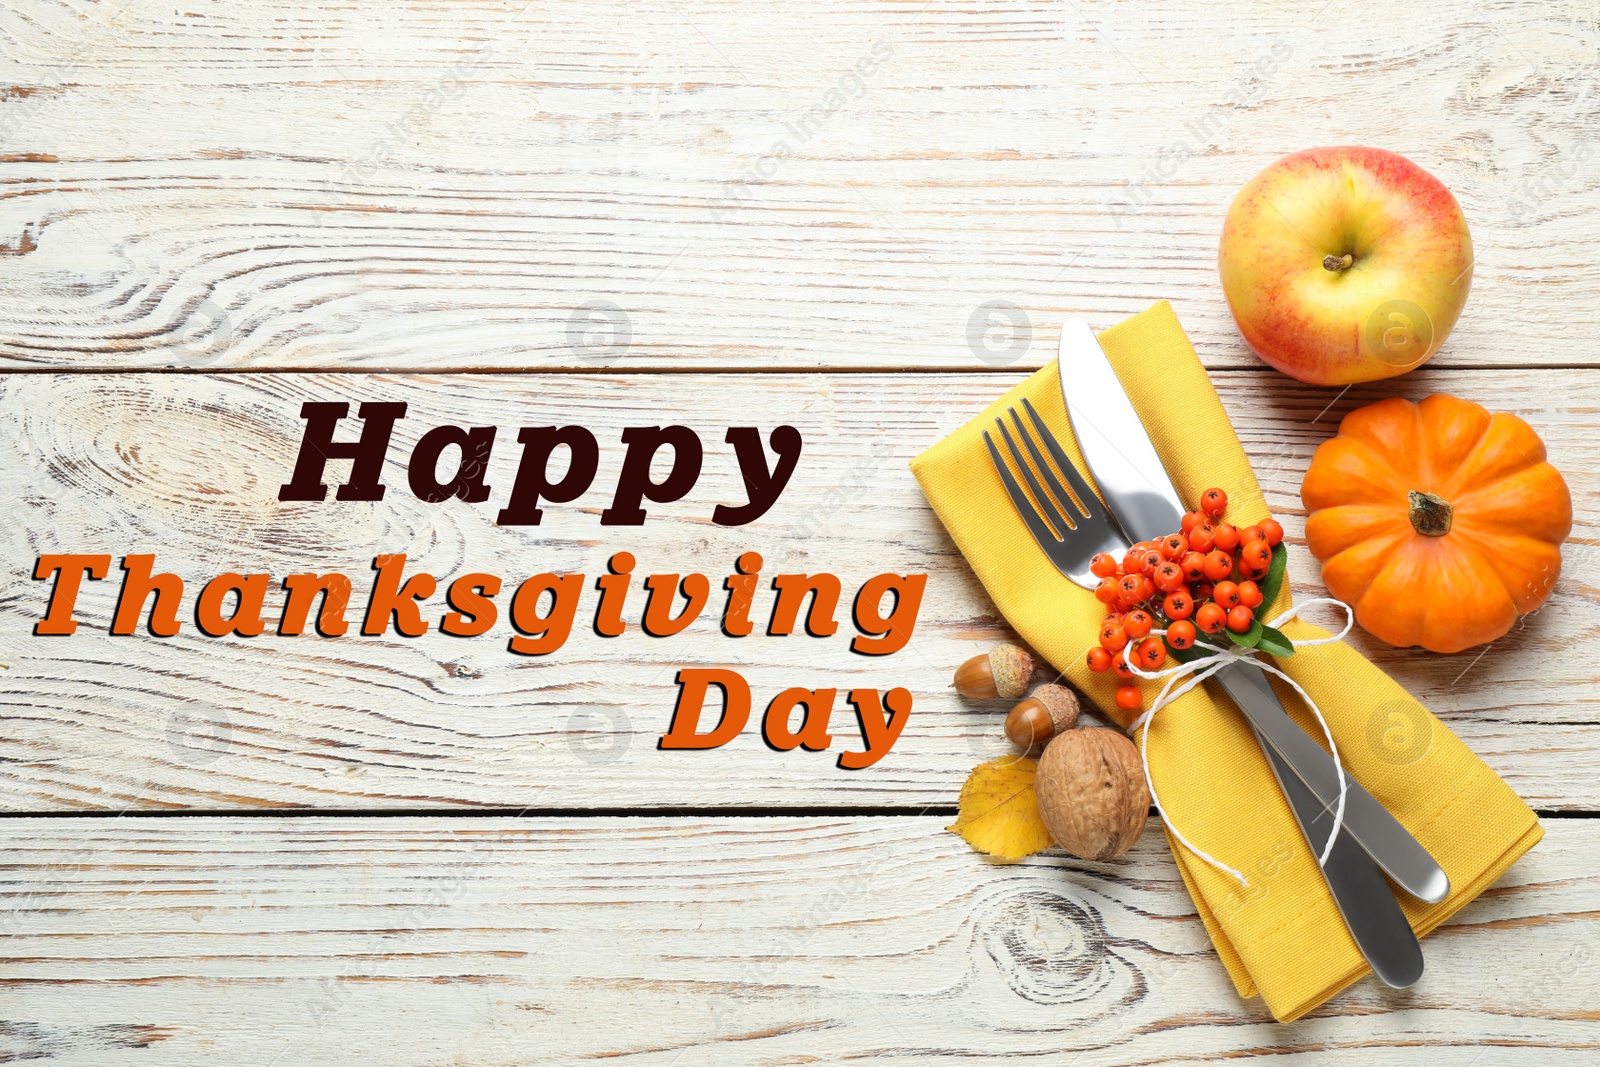 Image of Happy Thanksgiving Day card. Top view of cutlery with napkin and autumn decor on white wooden table